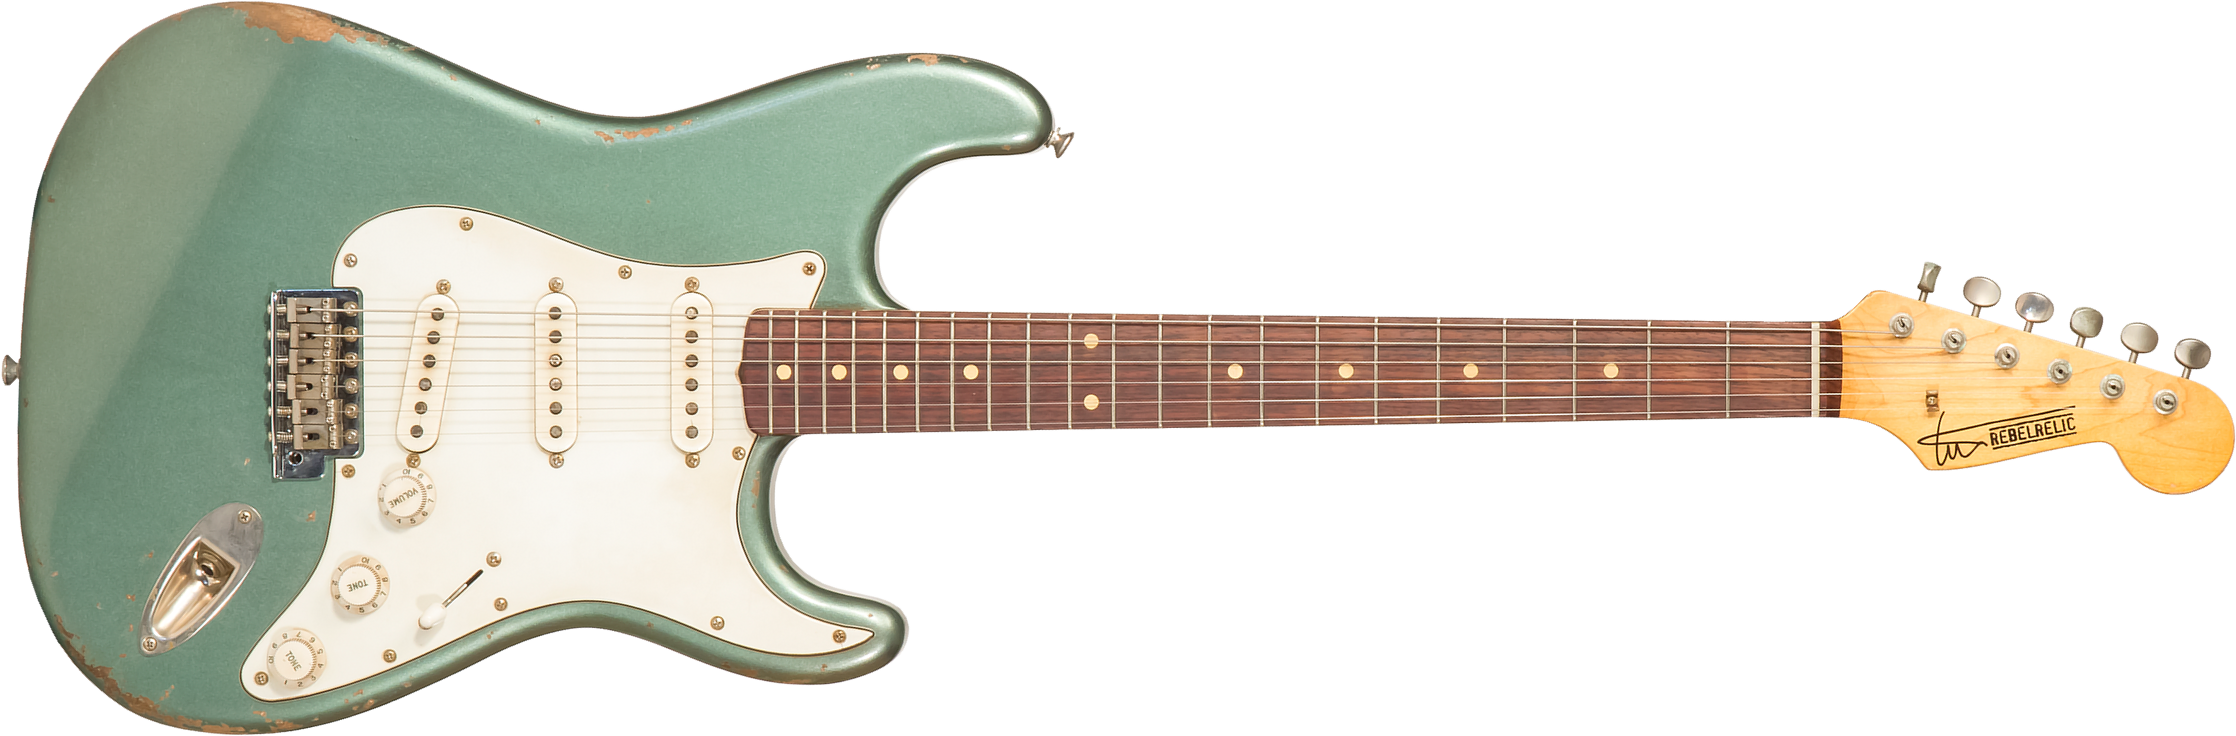 Rebelrelic S-series 62 3s Trem Rw #230203 - Light Aged Sherwood Forest Green - Guitare Électrique Forme Str - Main picture